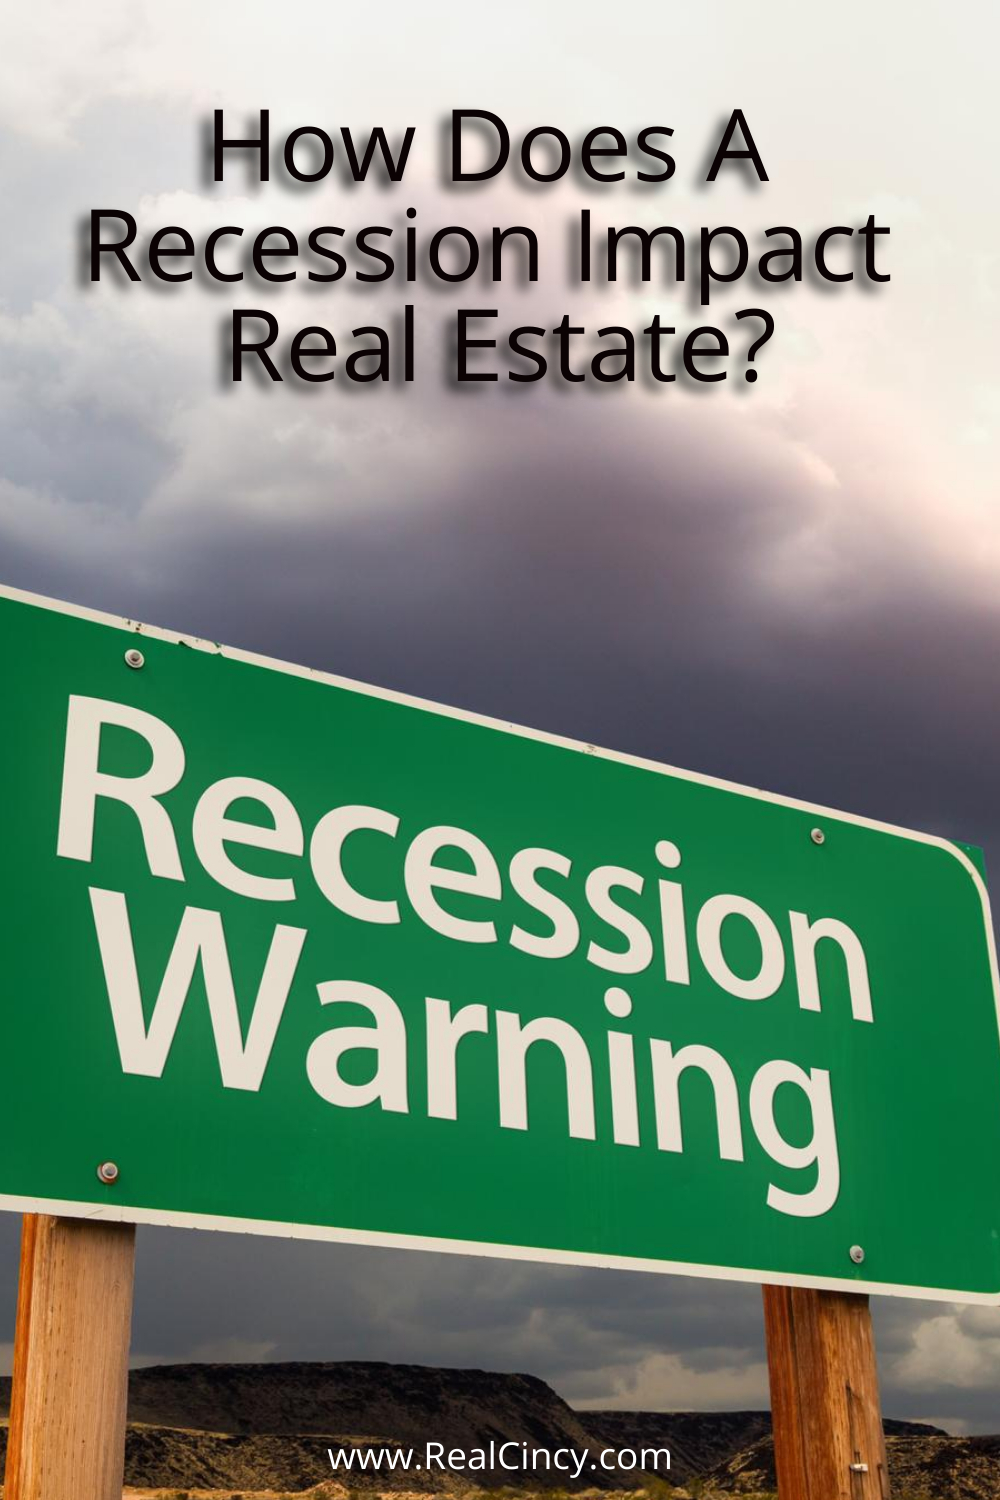 How Does A Recession Impact Real Estate?